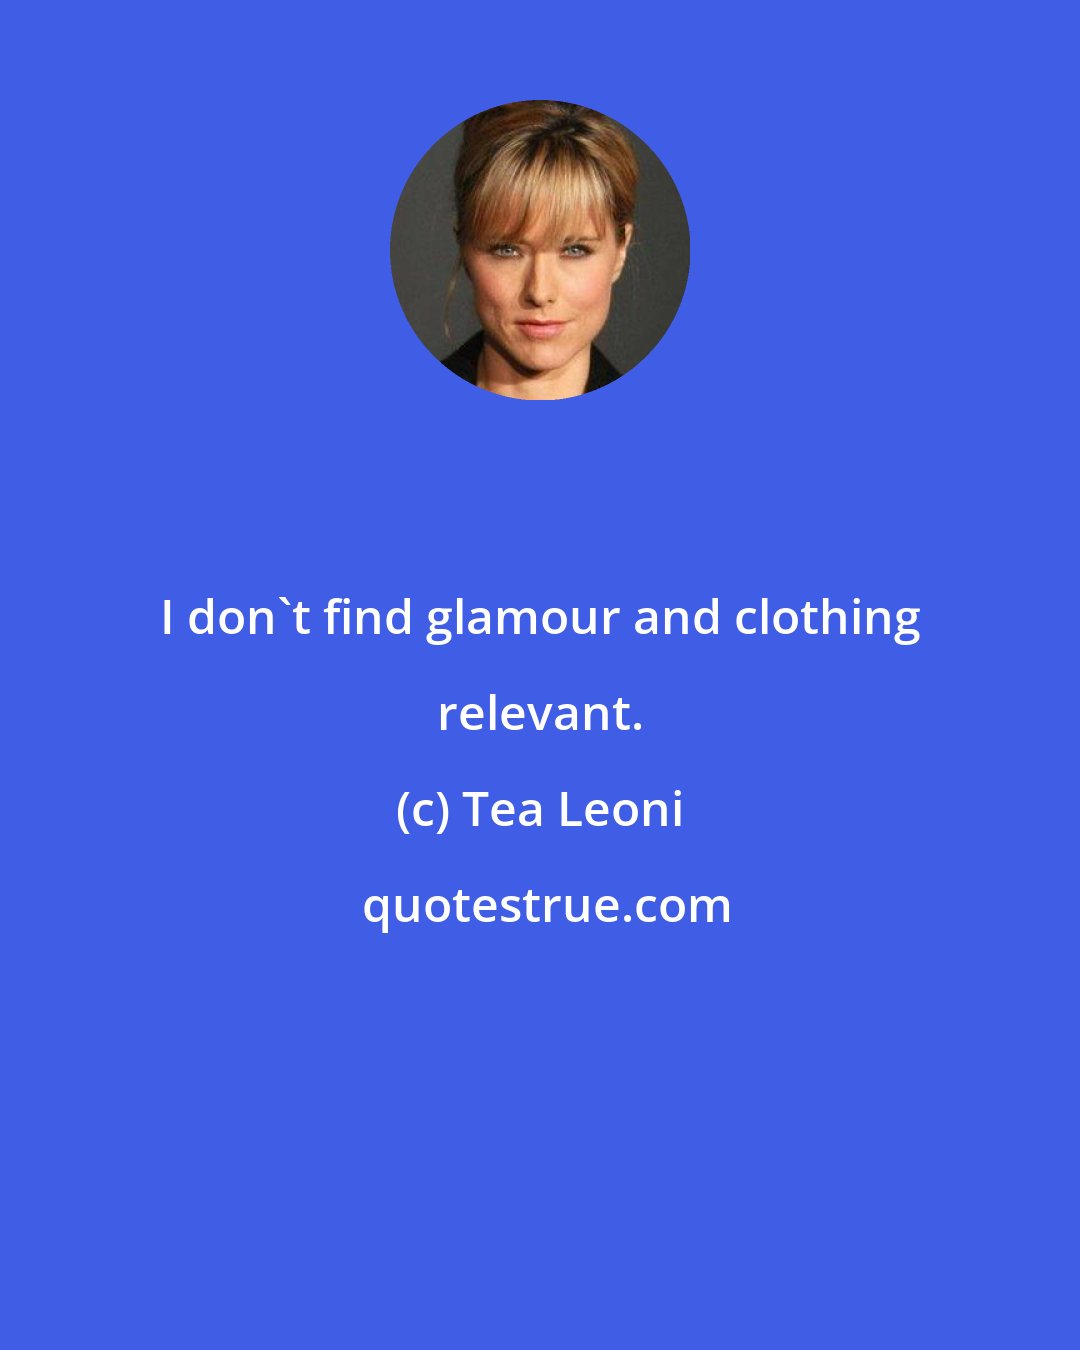 Tea Leoni: I don't find glamour and clothing relevant.